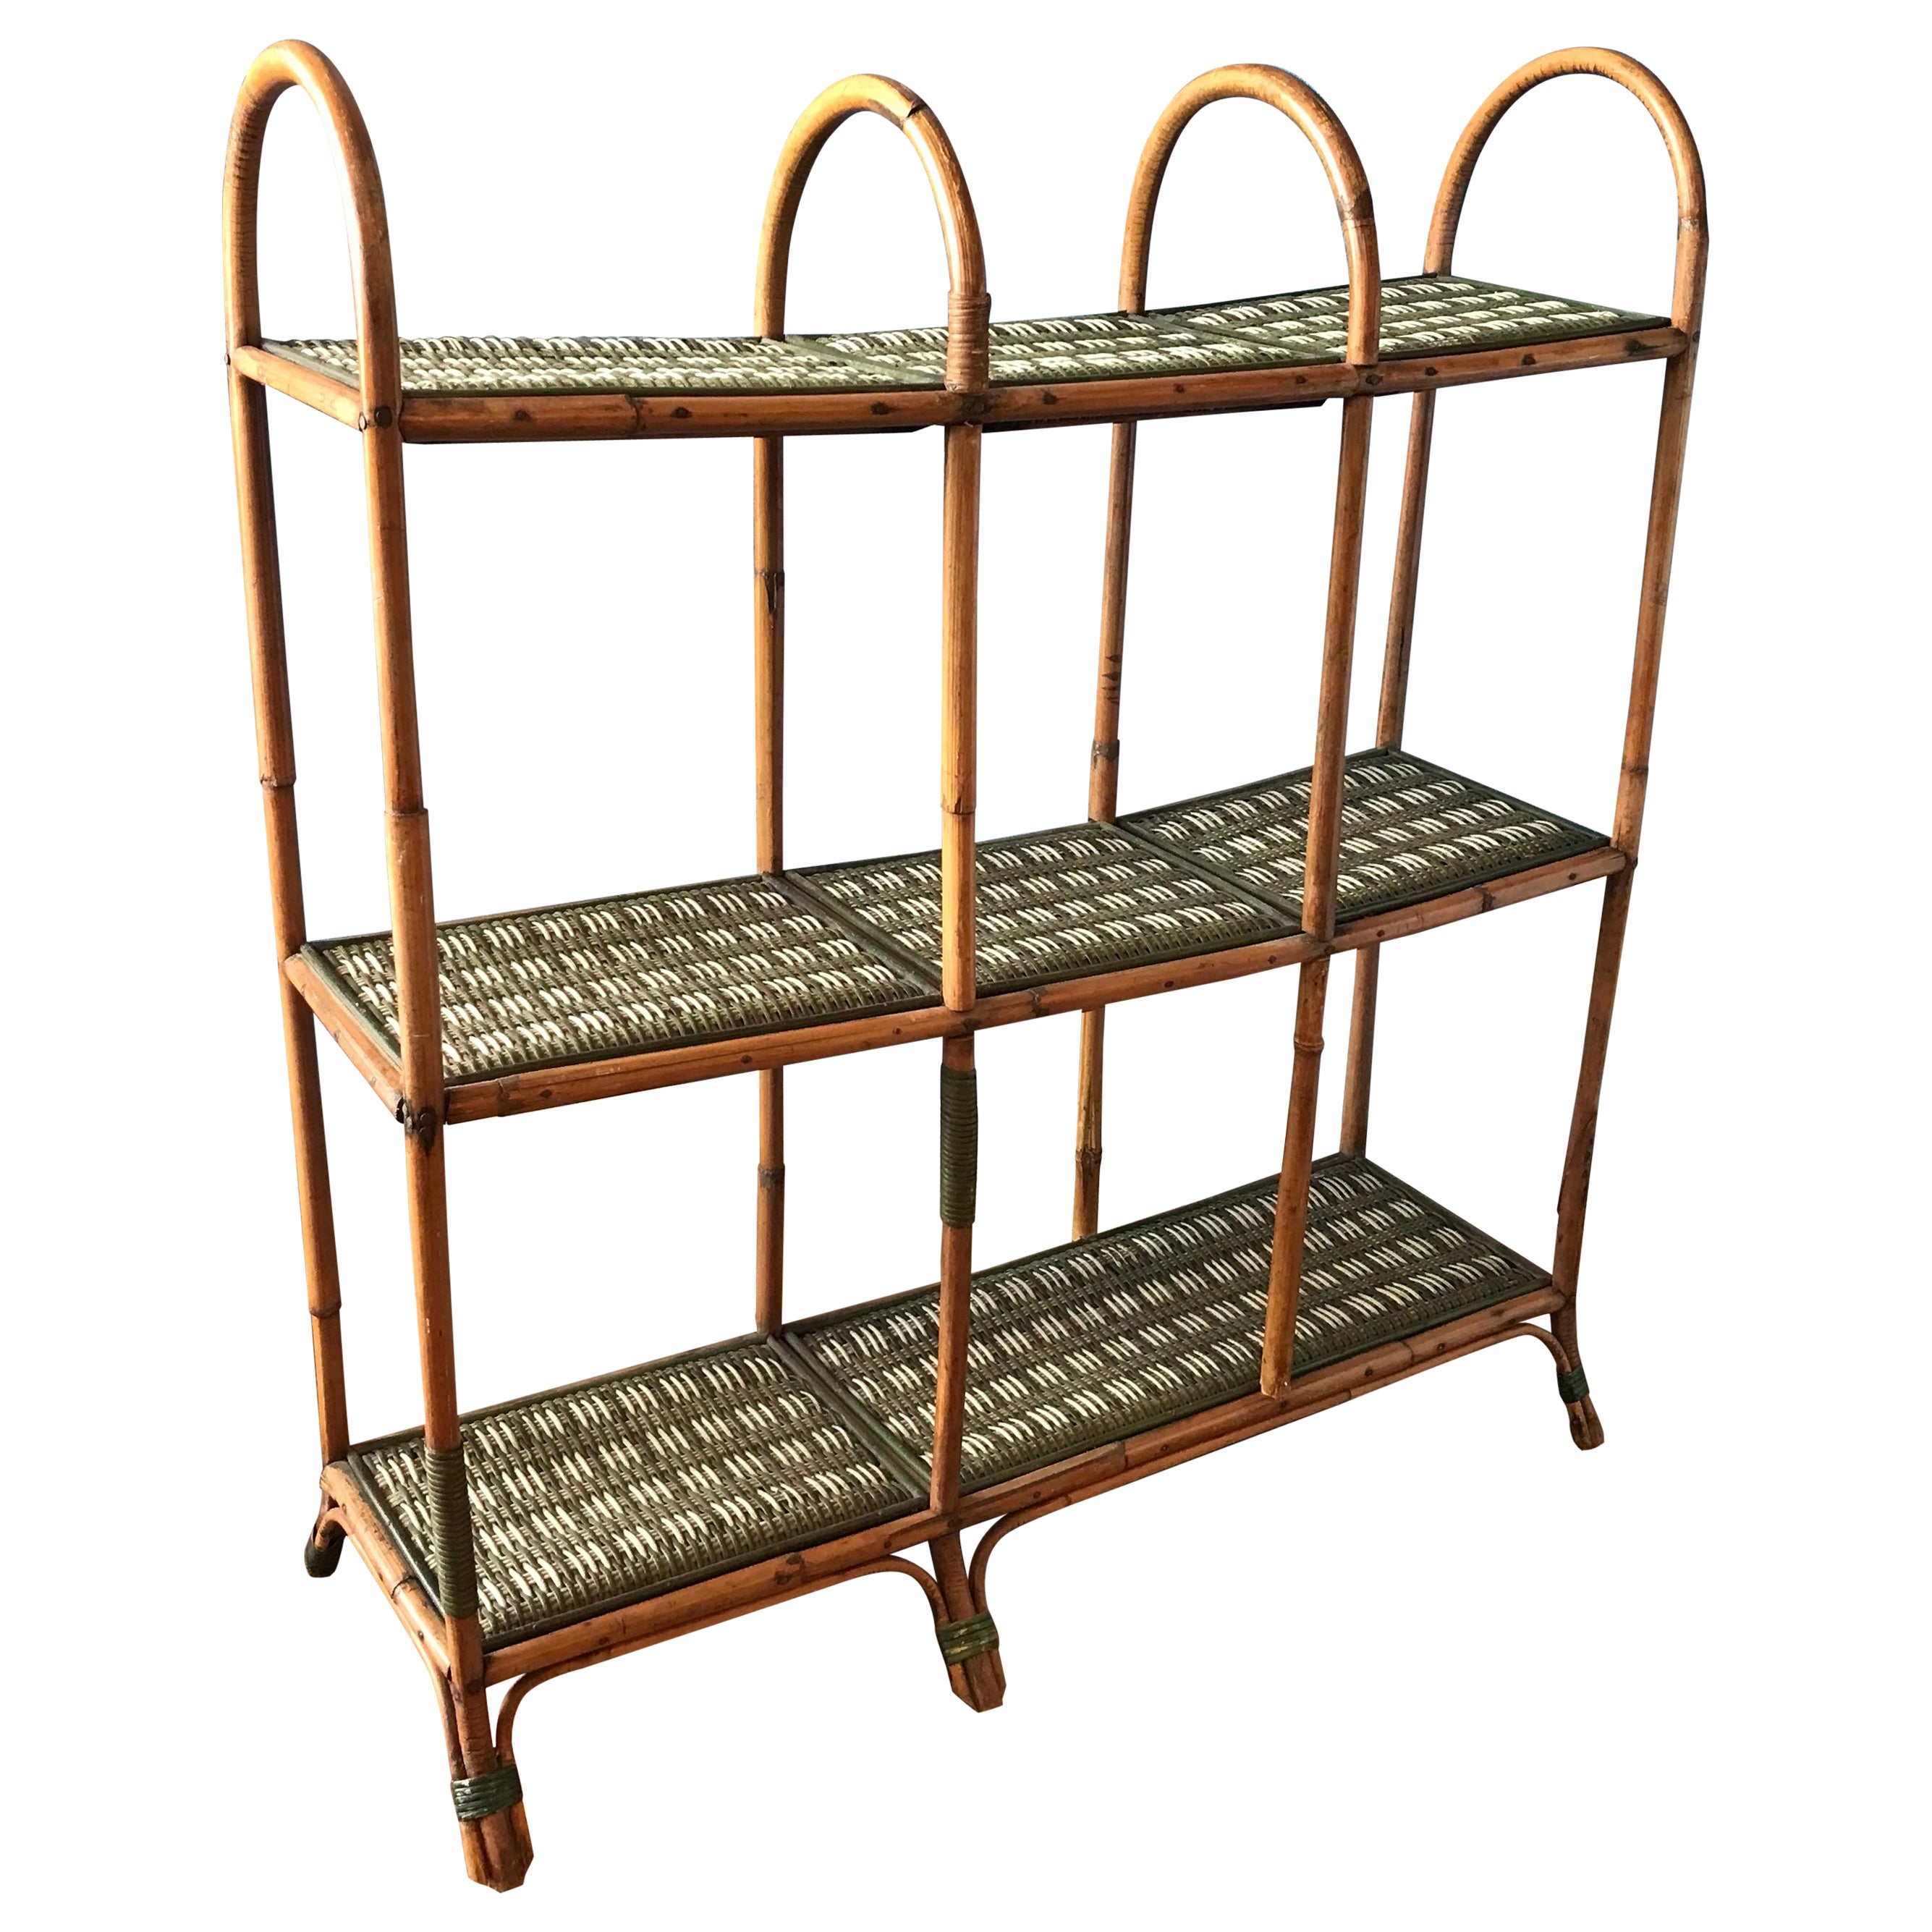 Vintage French Pastry Shelves